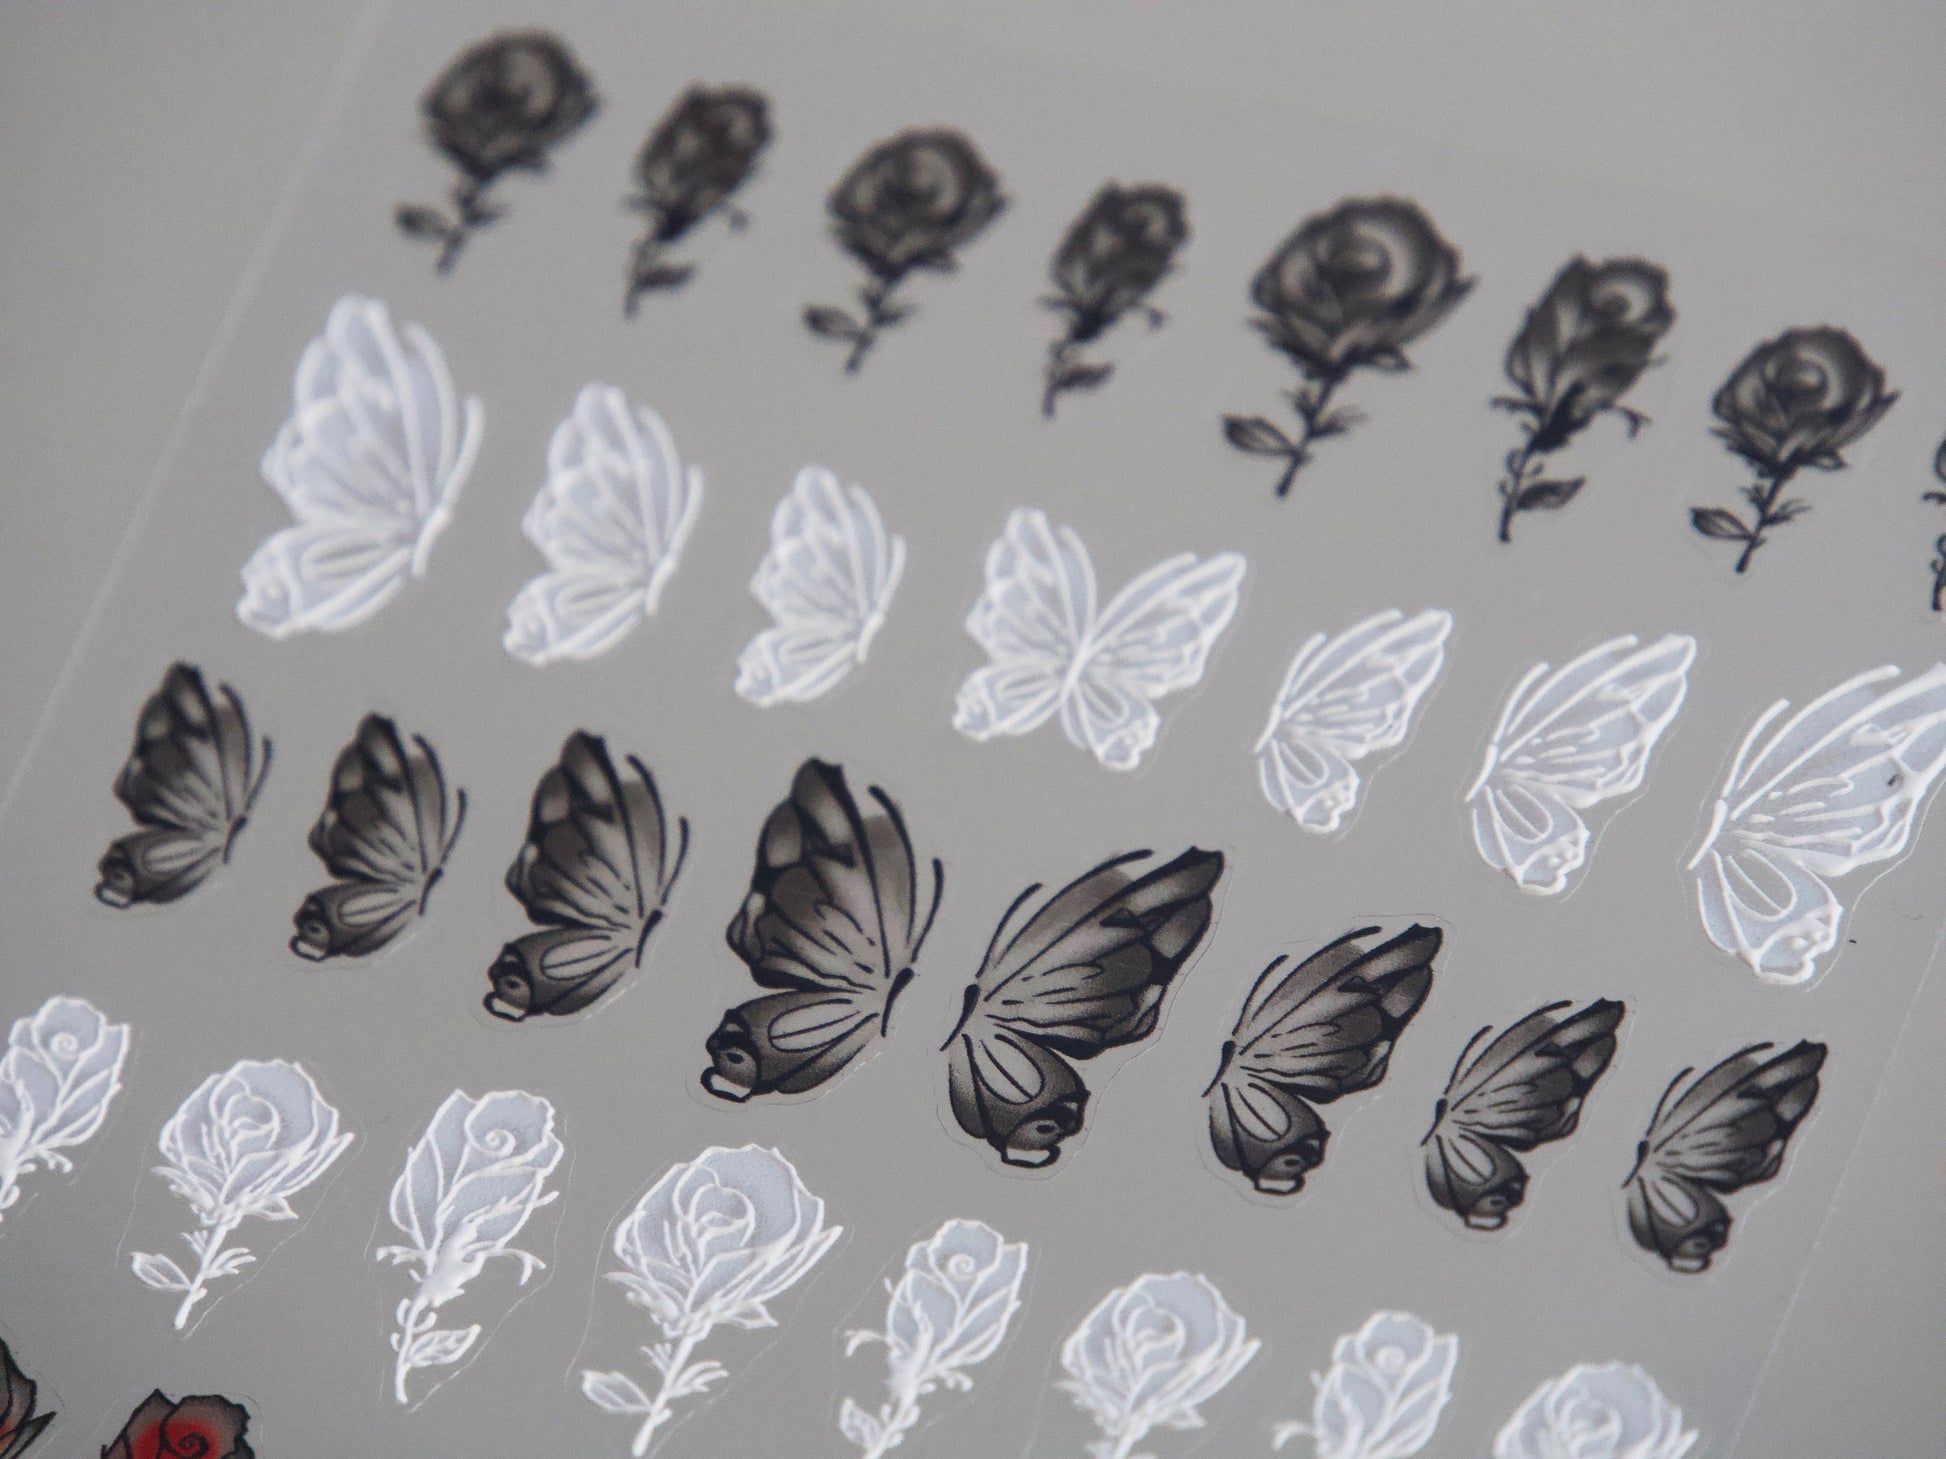 Butterfly & Rose Nail sticker/ Bloody Roses Nail Art Decals/ 3D Embossed Black White Spread Half Wings Butterflies Peel Off Stencil tatoo